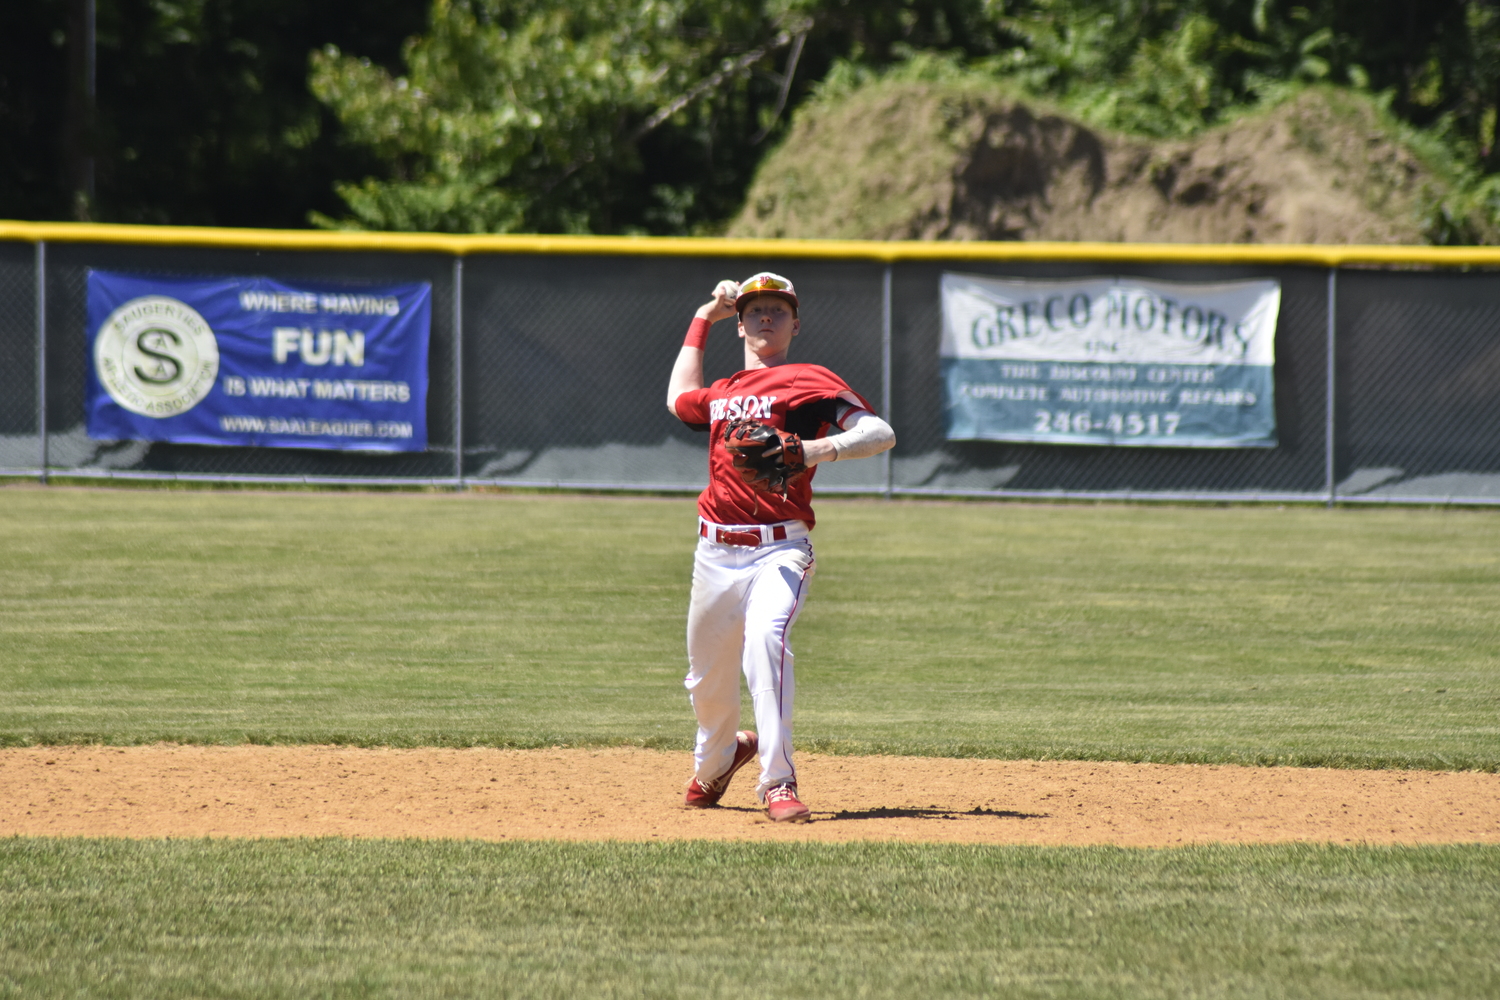 Pierson shortstop Spencer Cavaniola fires to first base after fielding a ground ball cleanly for an out.   DREW BUDD